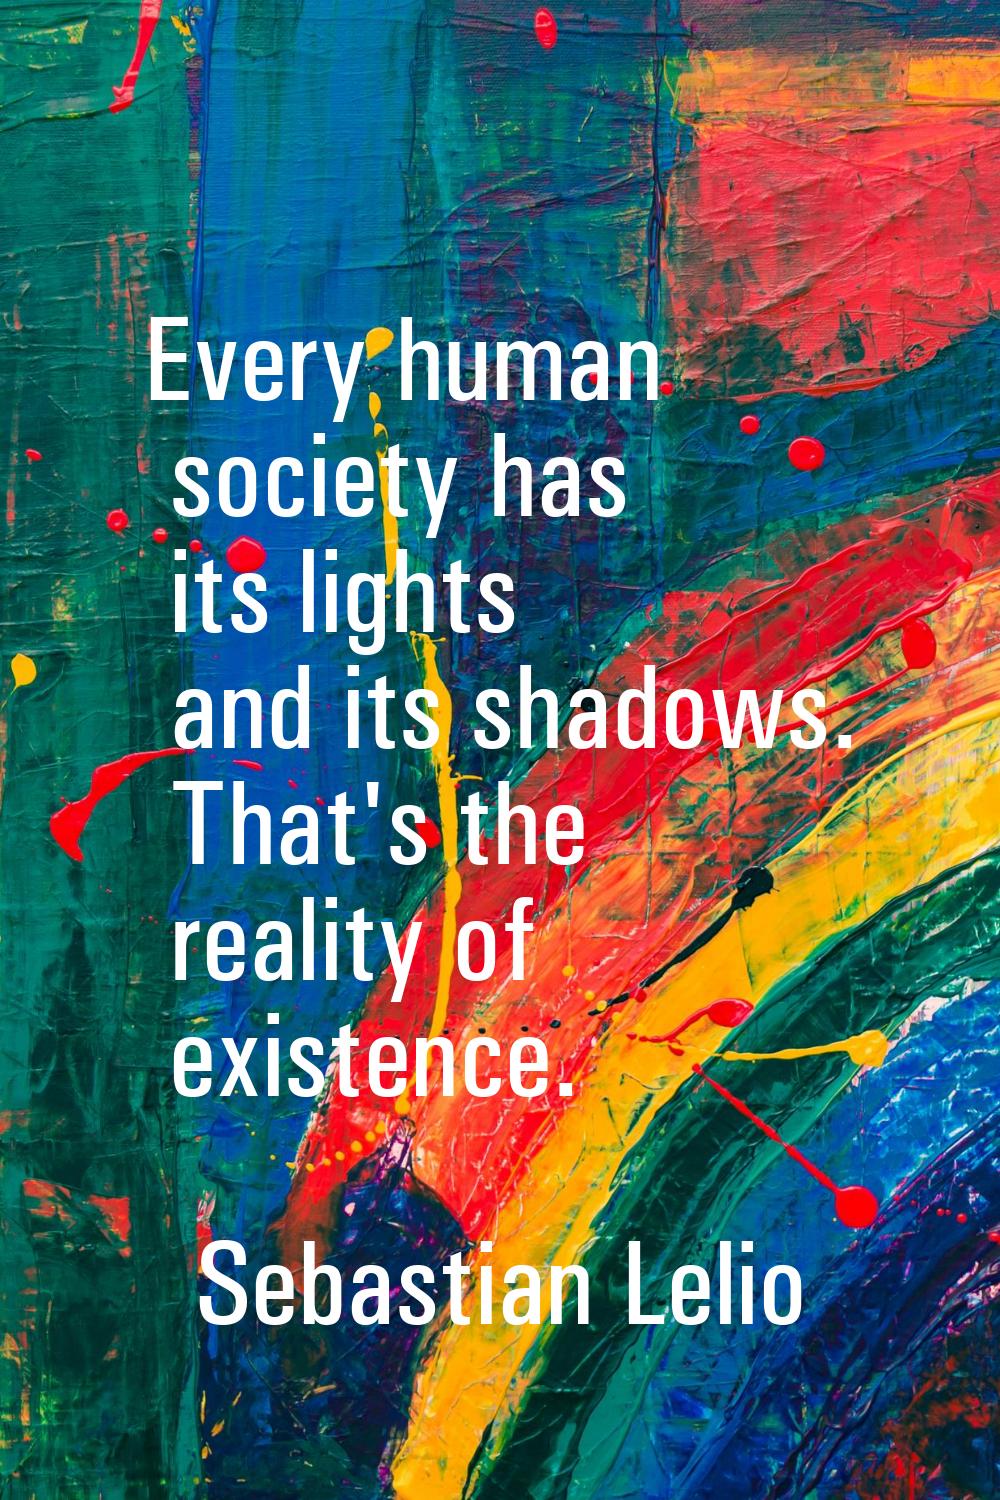 Every human society has its lights and its shadows. That's the reality of existence.